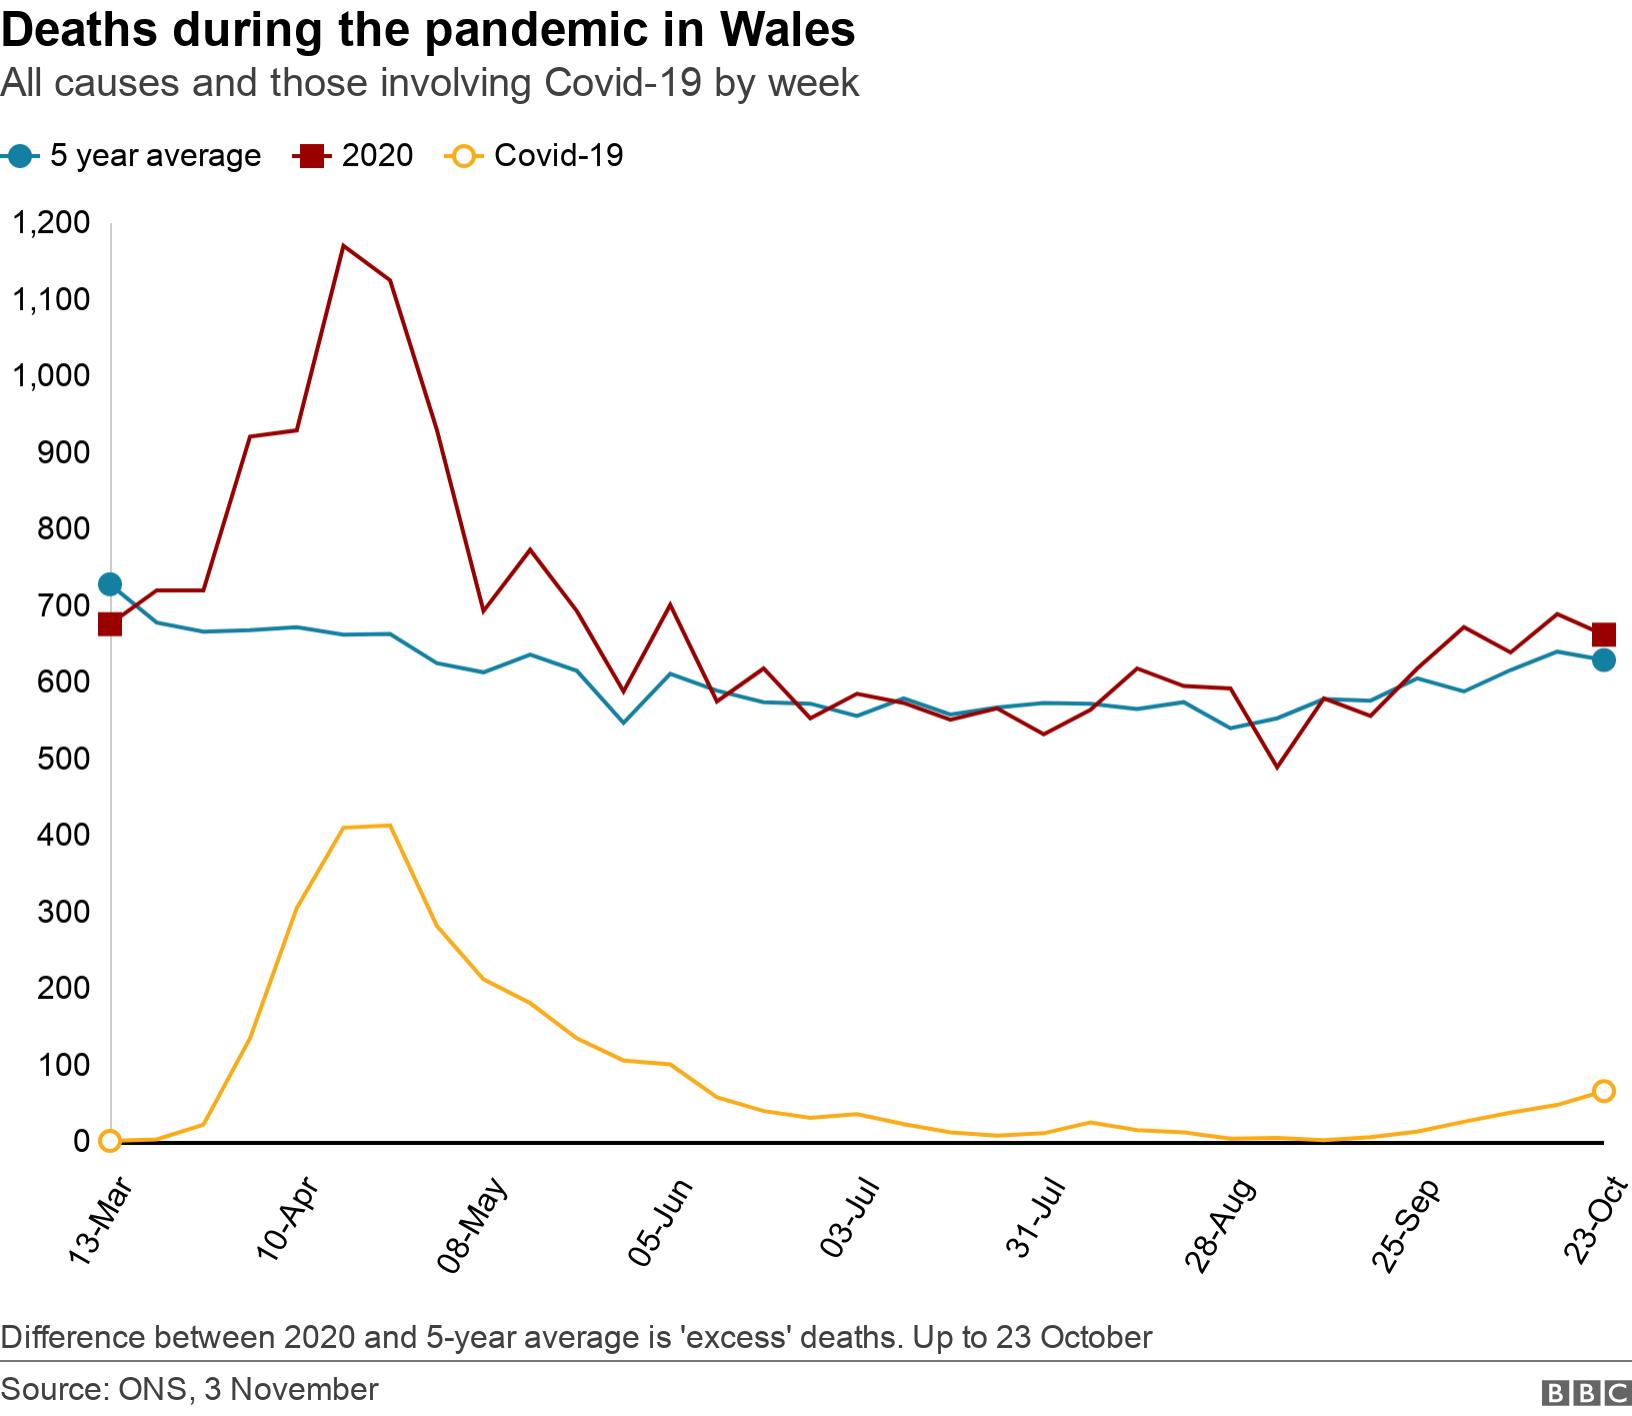 Deaths during the pandemic in Wales. All causes and those involving Covid-19 by week. Difference between 2020 and 5-year average is &#39;excess&#39; deaths. Up to 23 October.